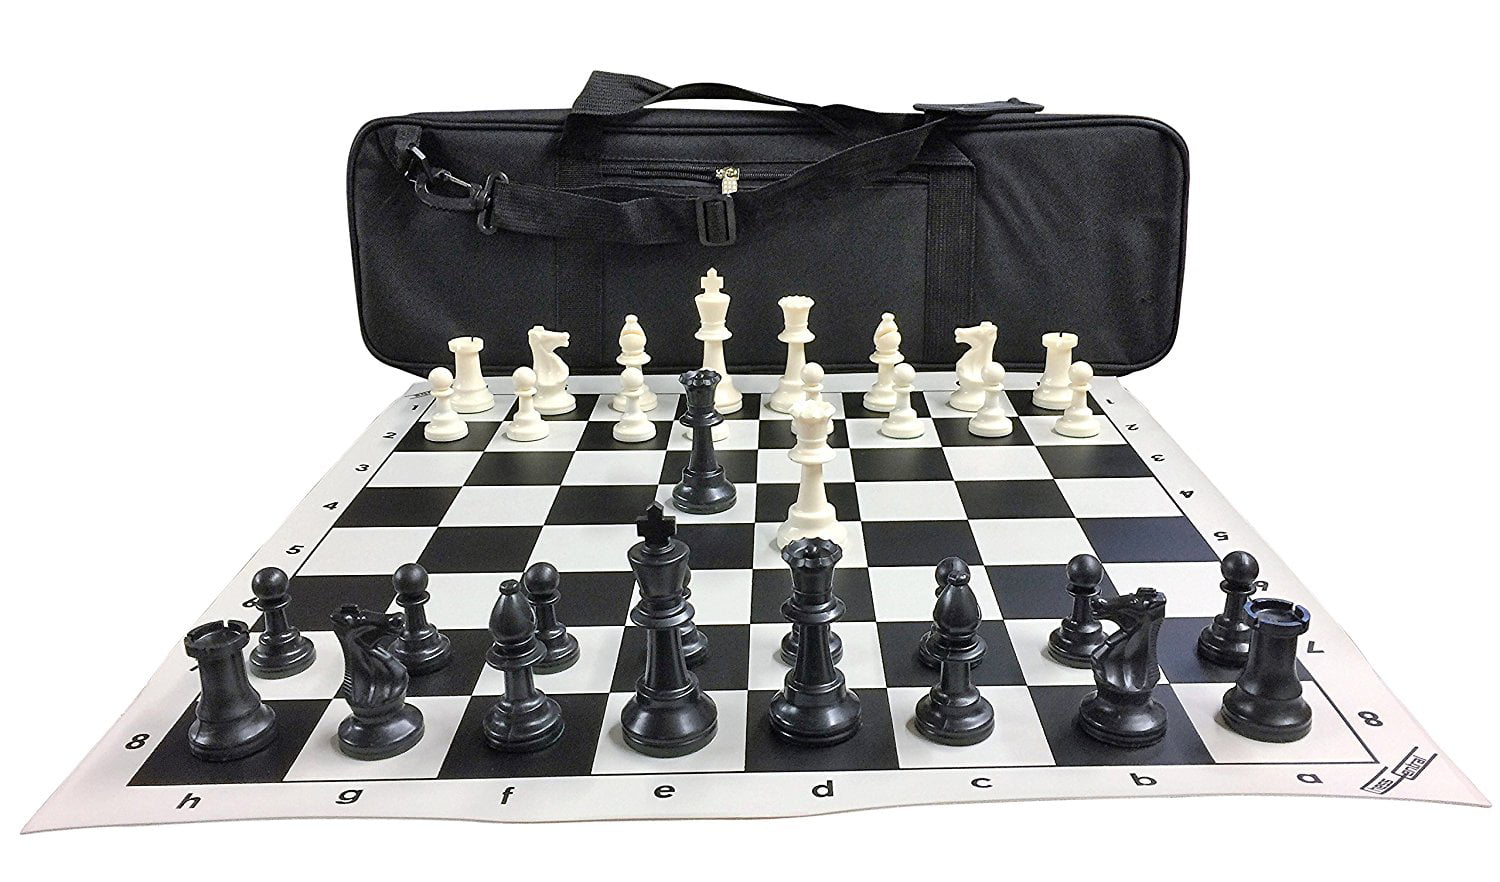 Triple Weighted Chess Pieces 17 Black Pieces & 17 White Pieces 